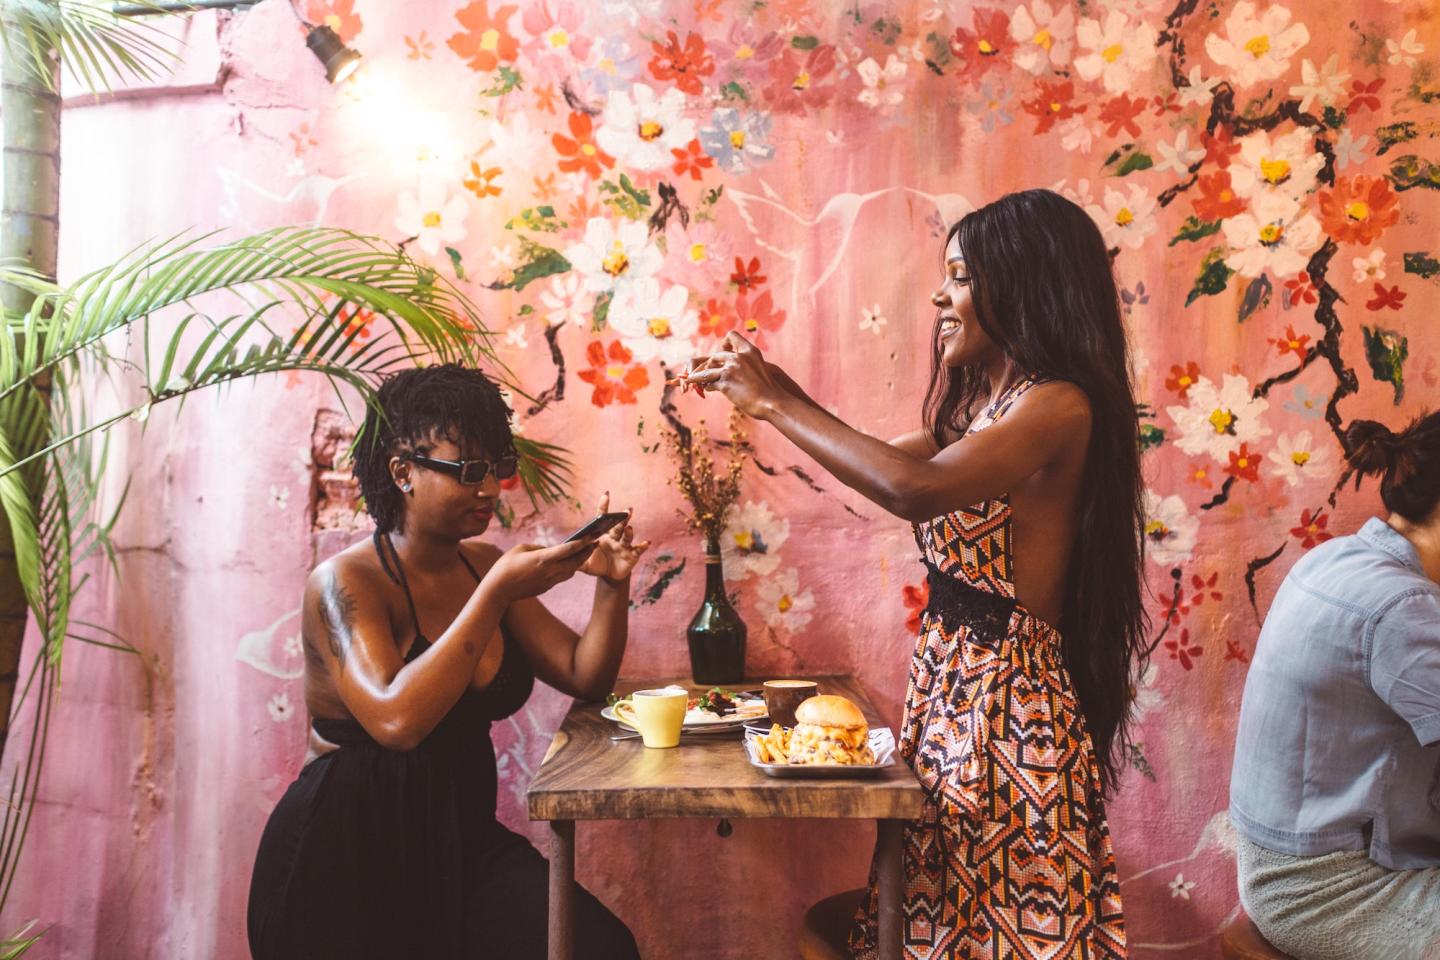 2 women taking photos of their food in a pink and flowery restaurant